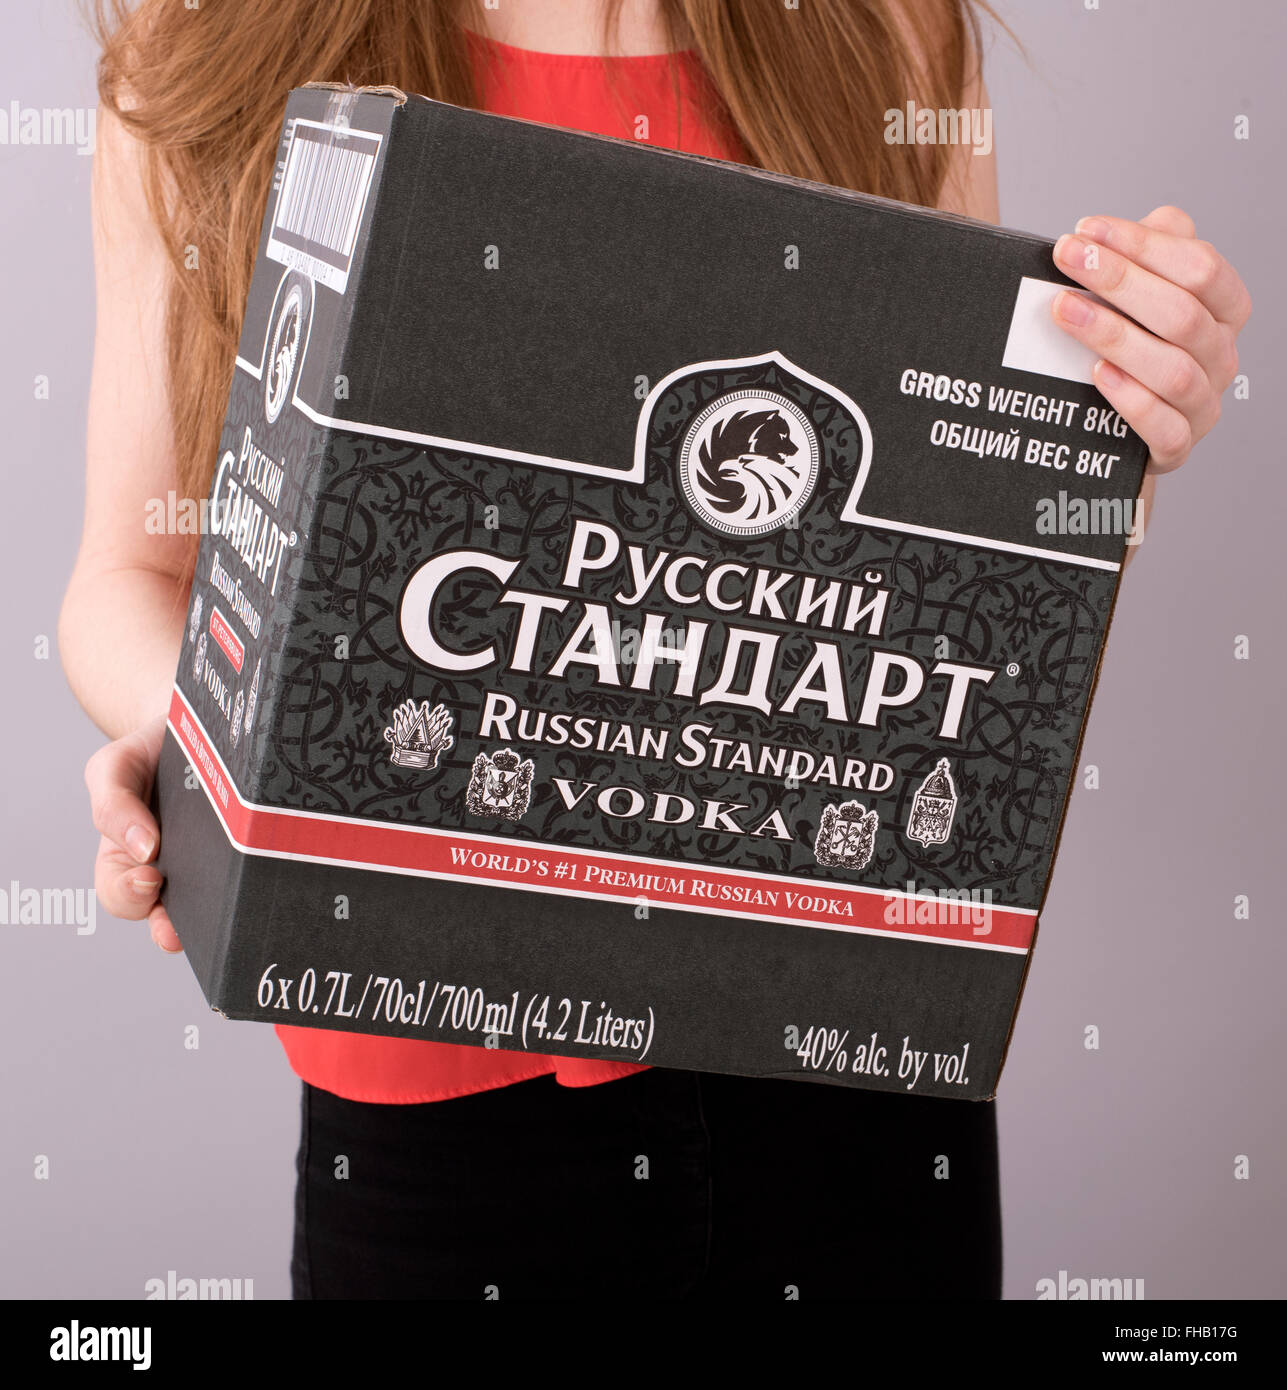 Young woman carrying a box of Russian Vodka Stock Photo